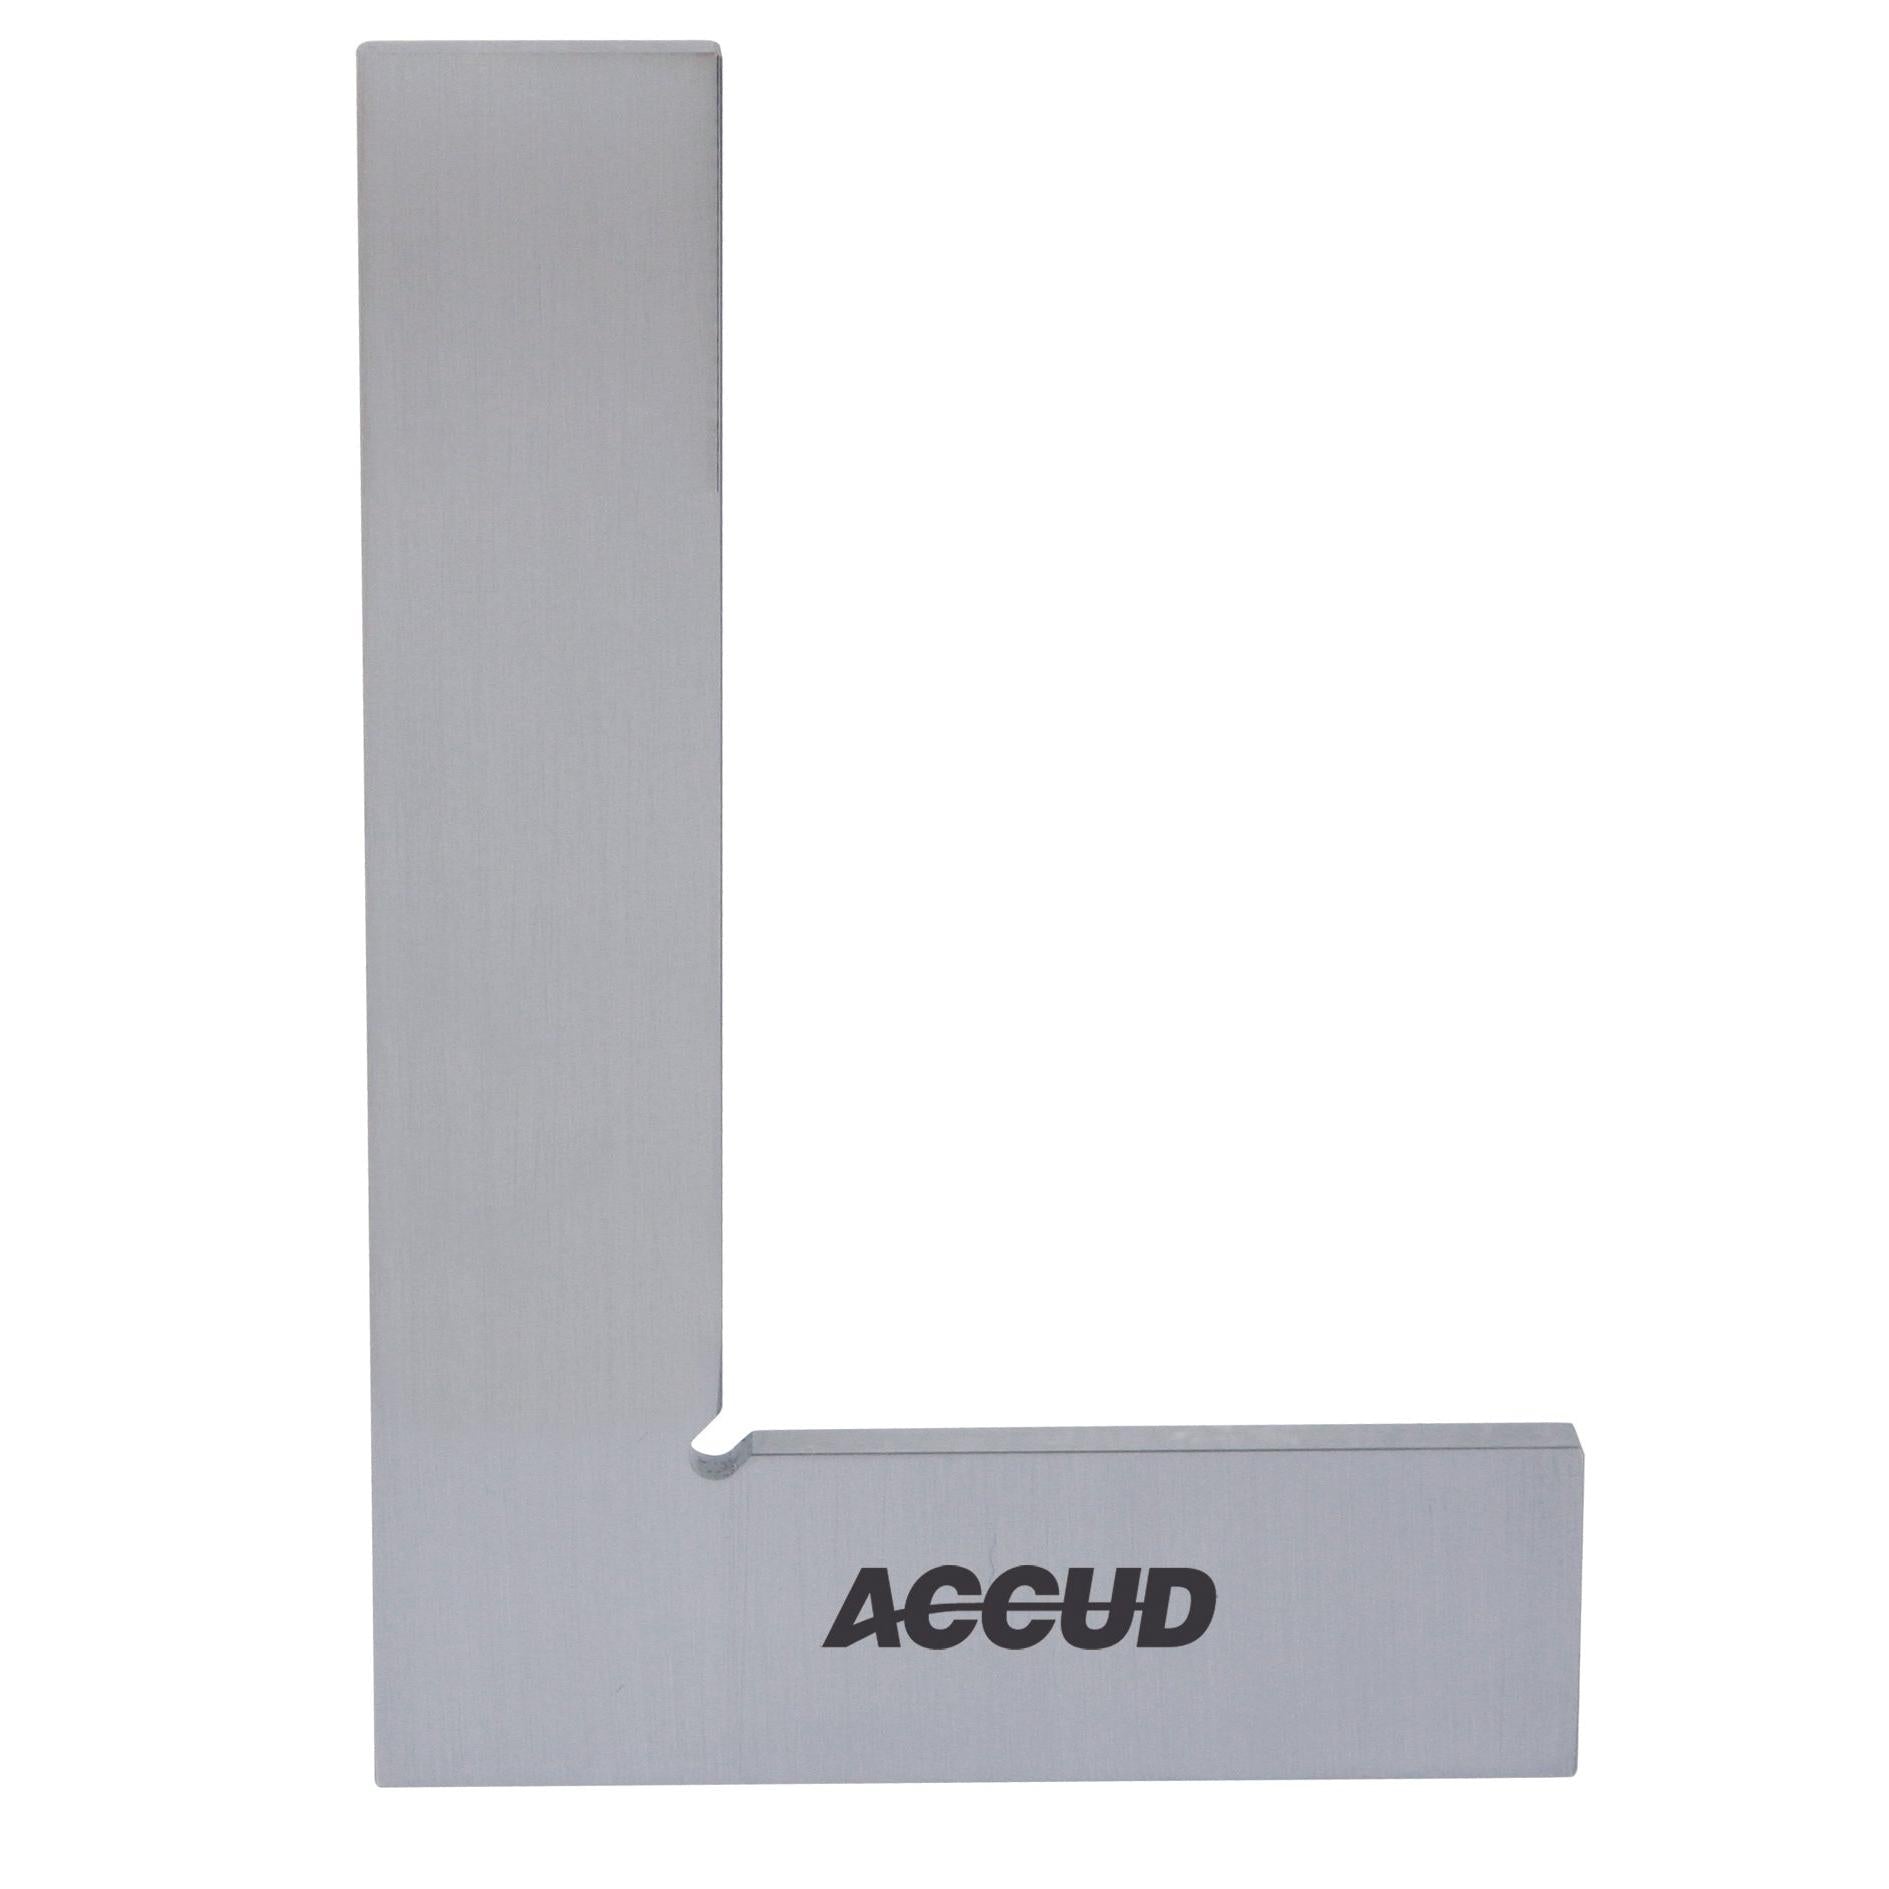 ACCUD | Flat Edge Square 150X100Mm | 841-006-10 Power Tool Services